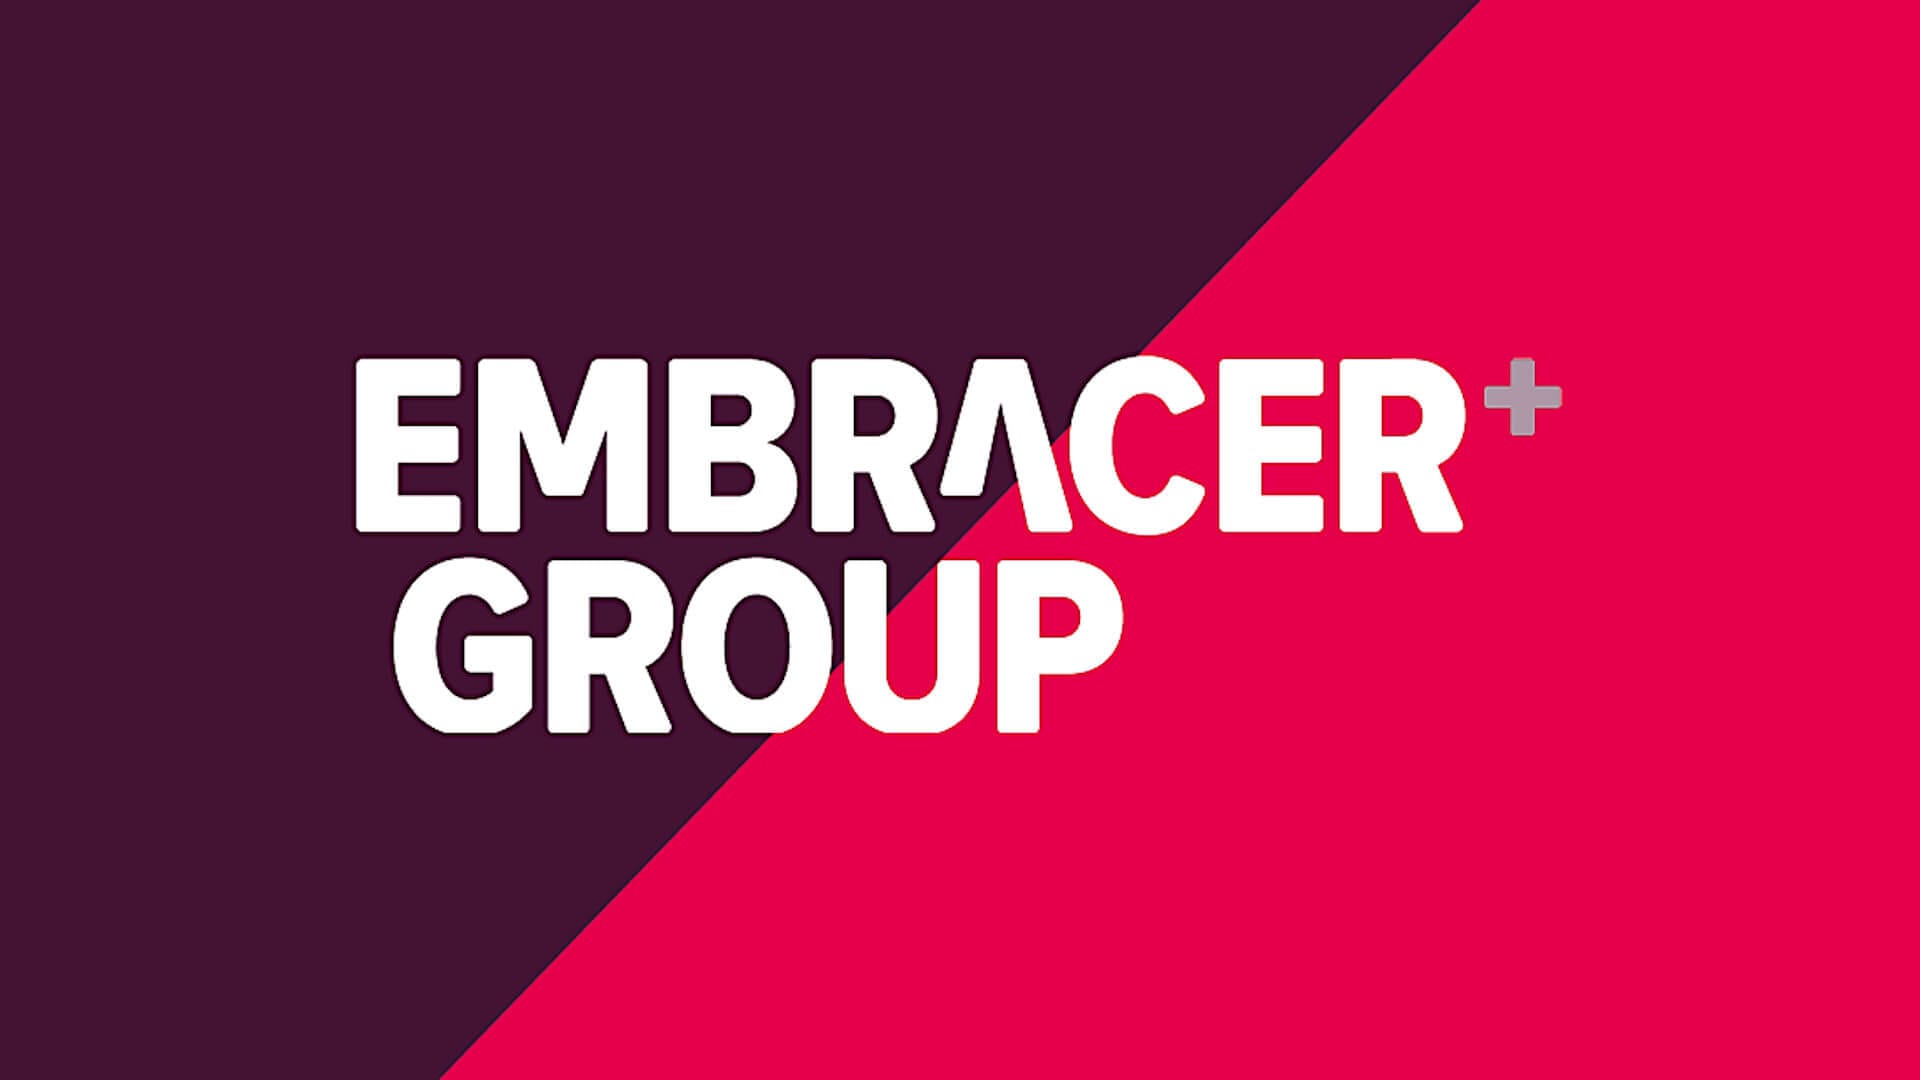 The logo for the Embracer Group